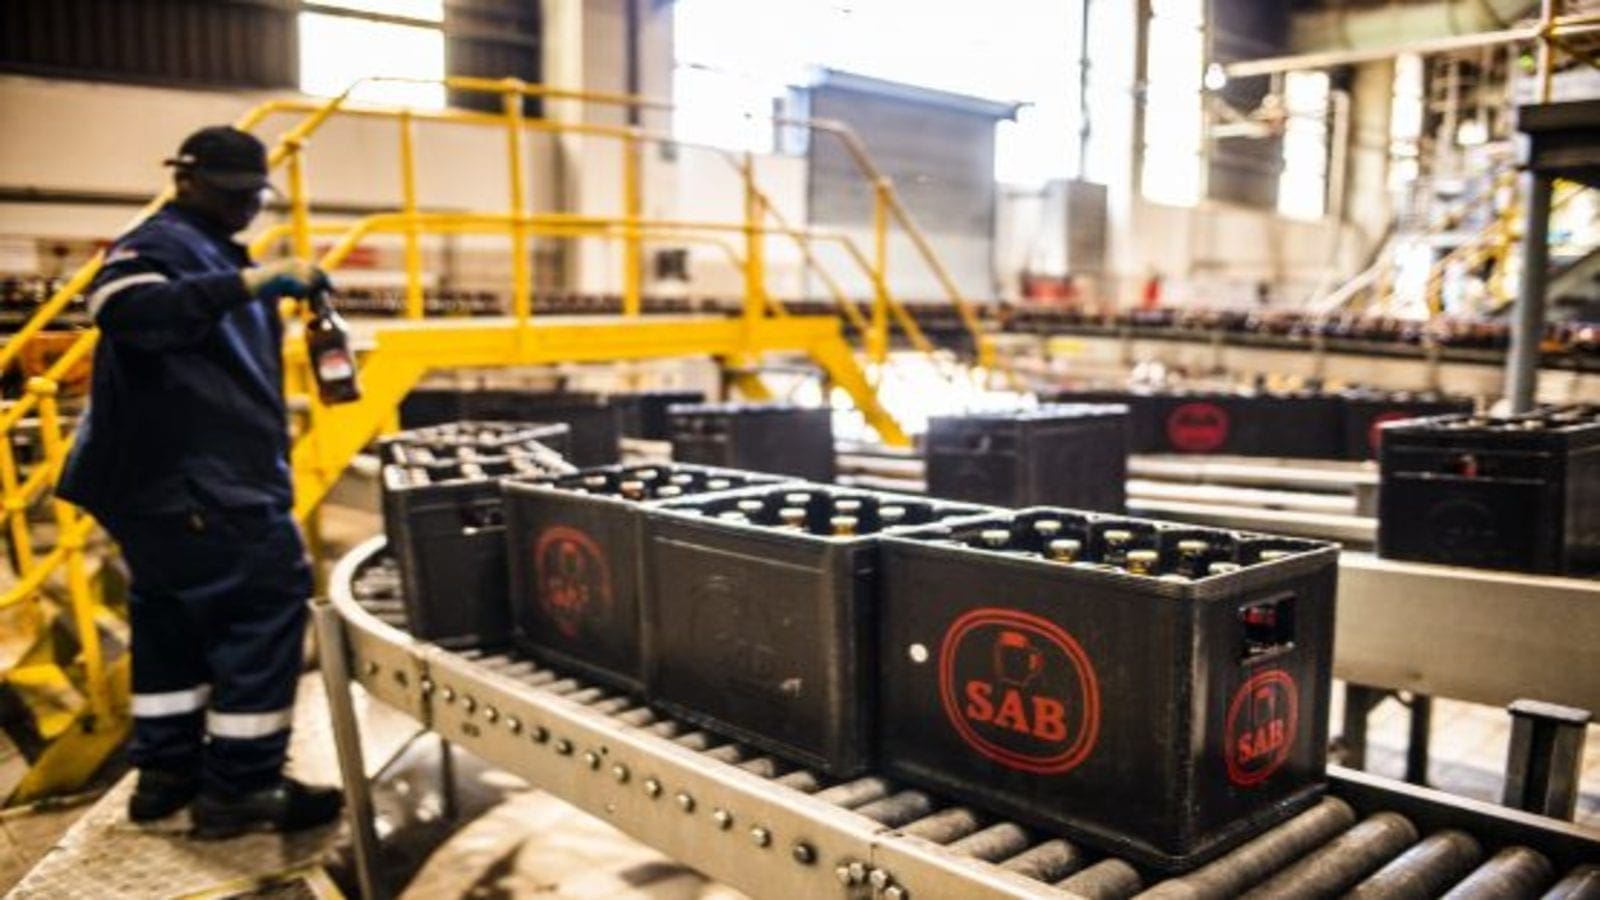 South African economy losses US$328m worth of investment from SAB after cancelling another US$164m planned expenditure